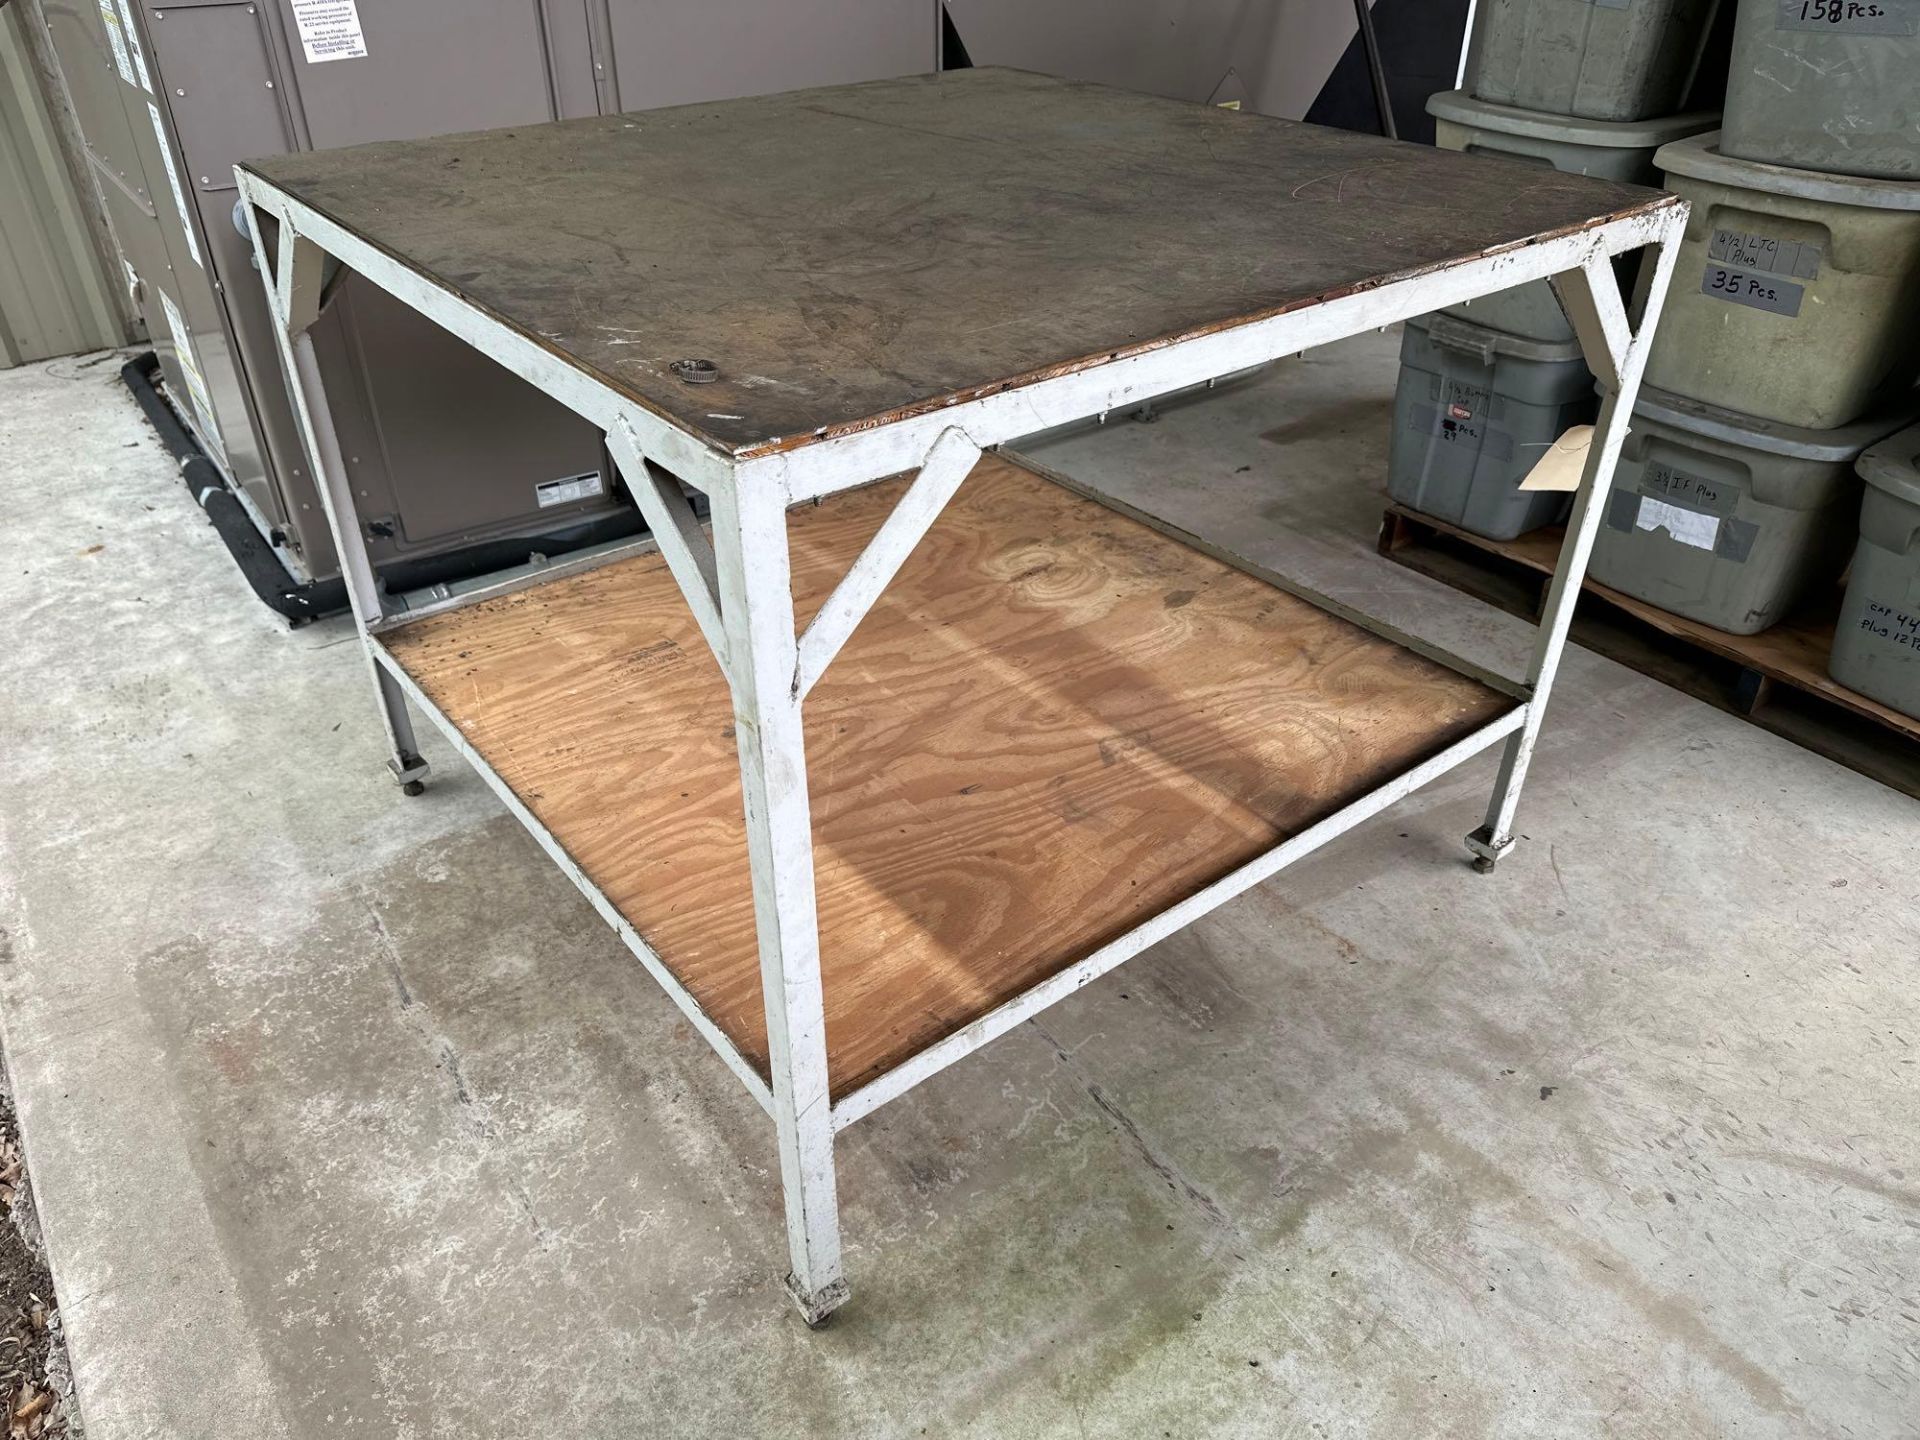 Metal Table with Wooden Top 48” X 48” X 39” - Image 2 of 3